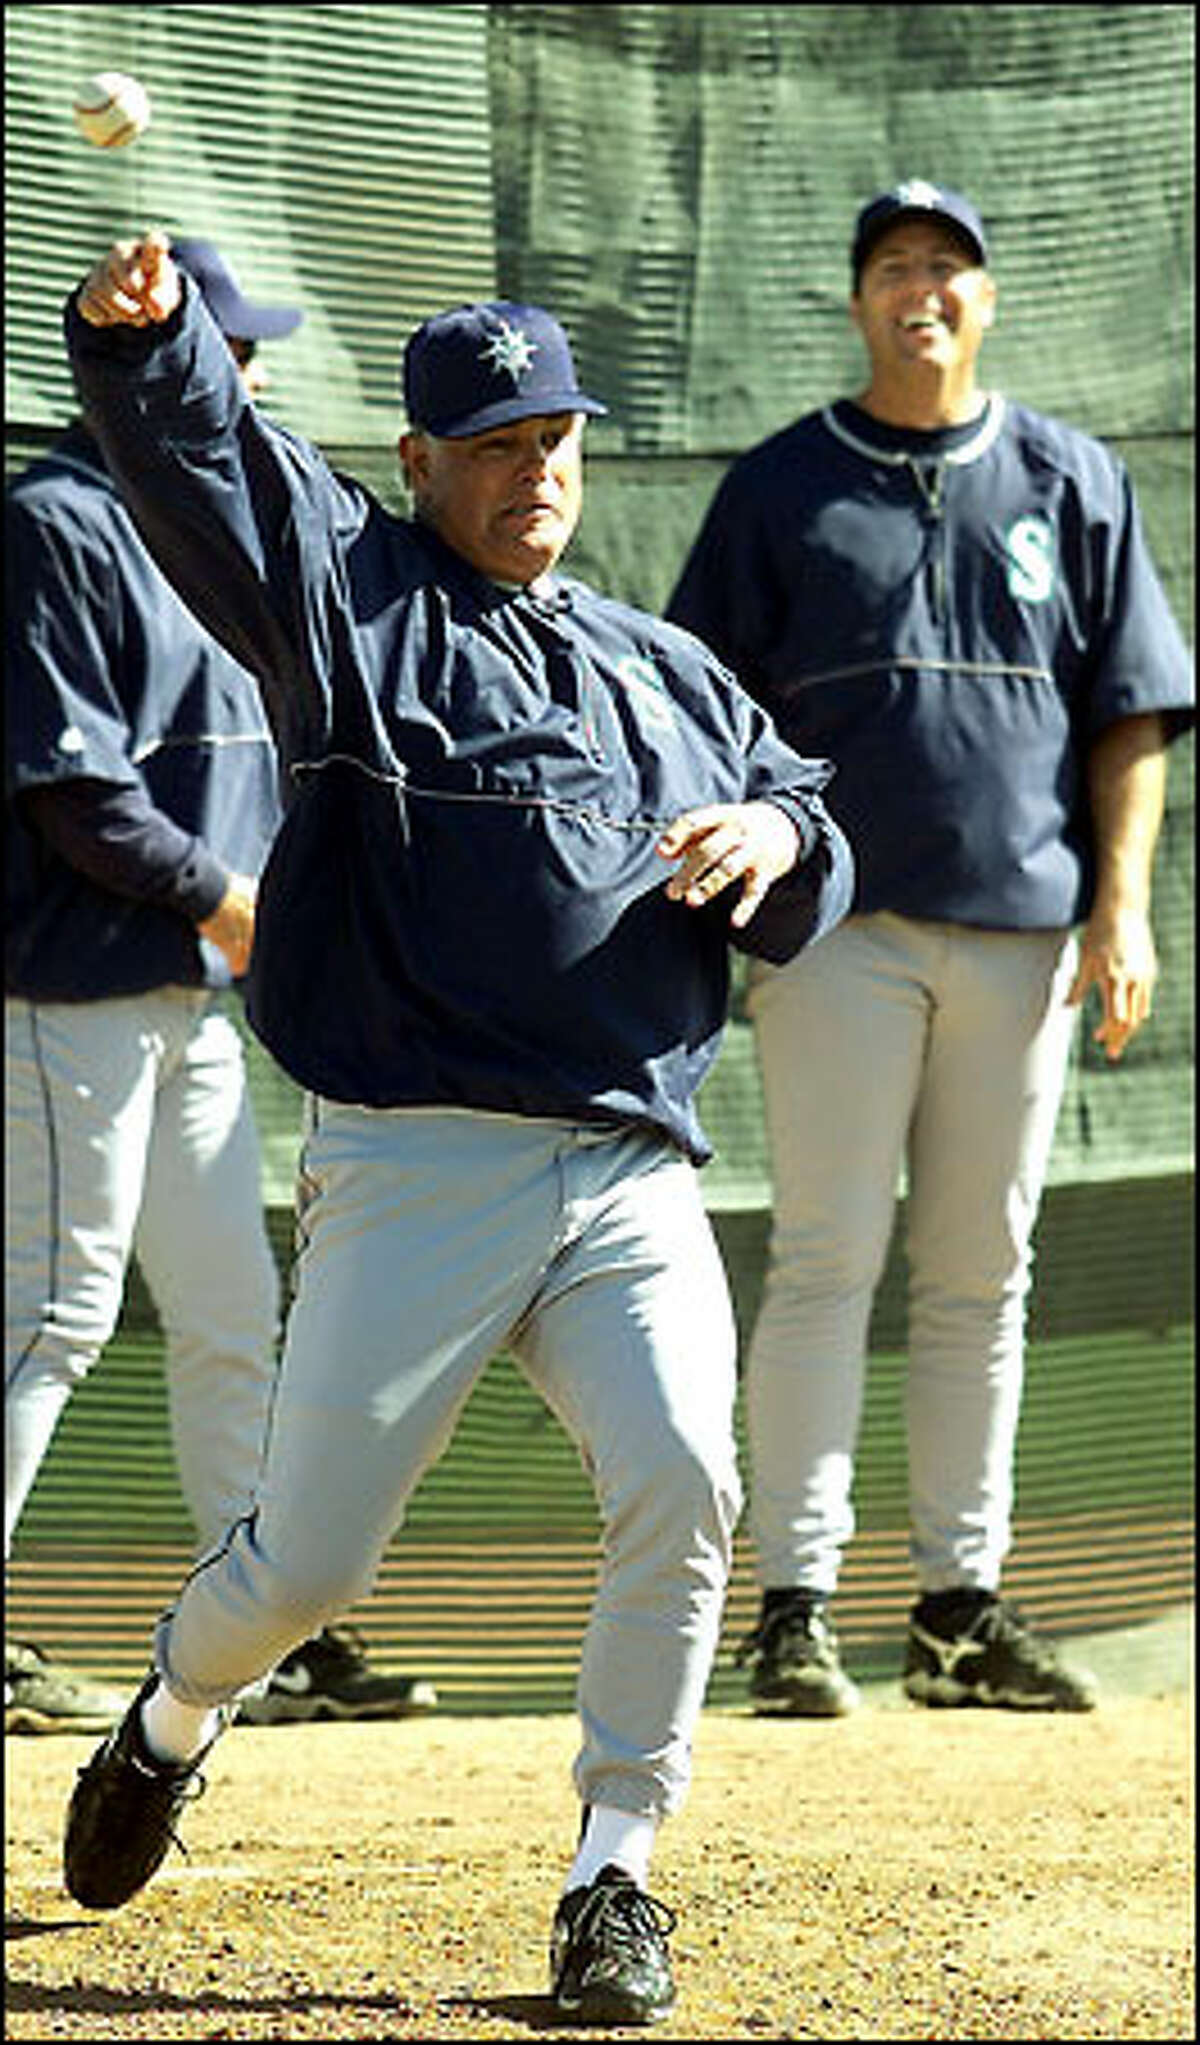 Lou Piniella shows off his pitching form, as pitching coach Bryan Price gets a good laugh.